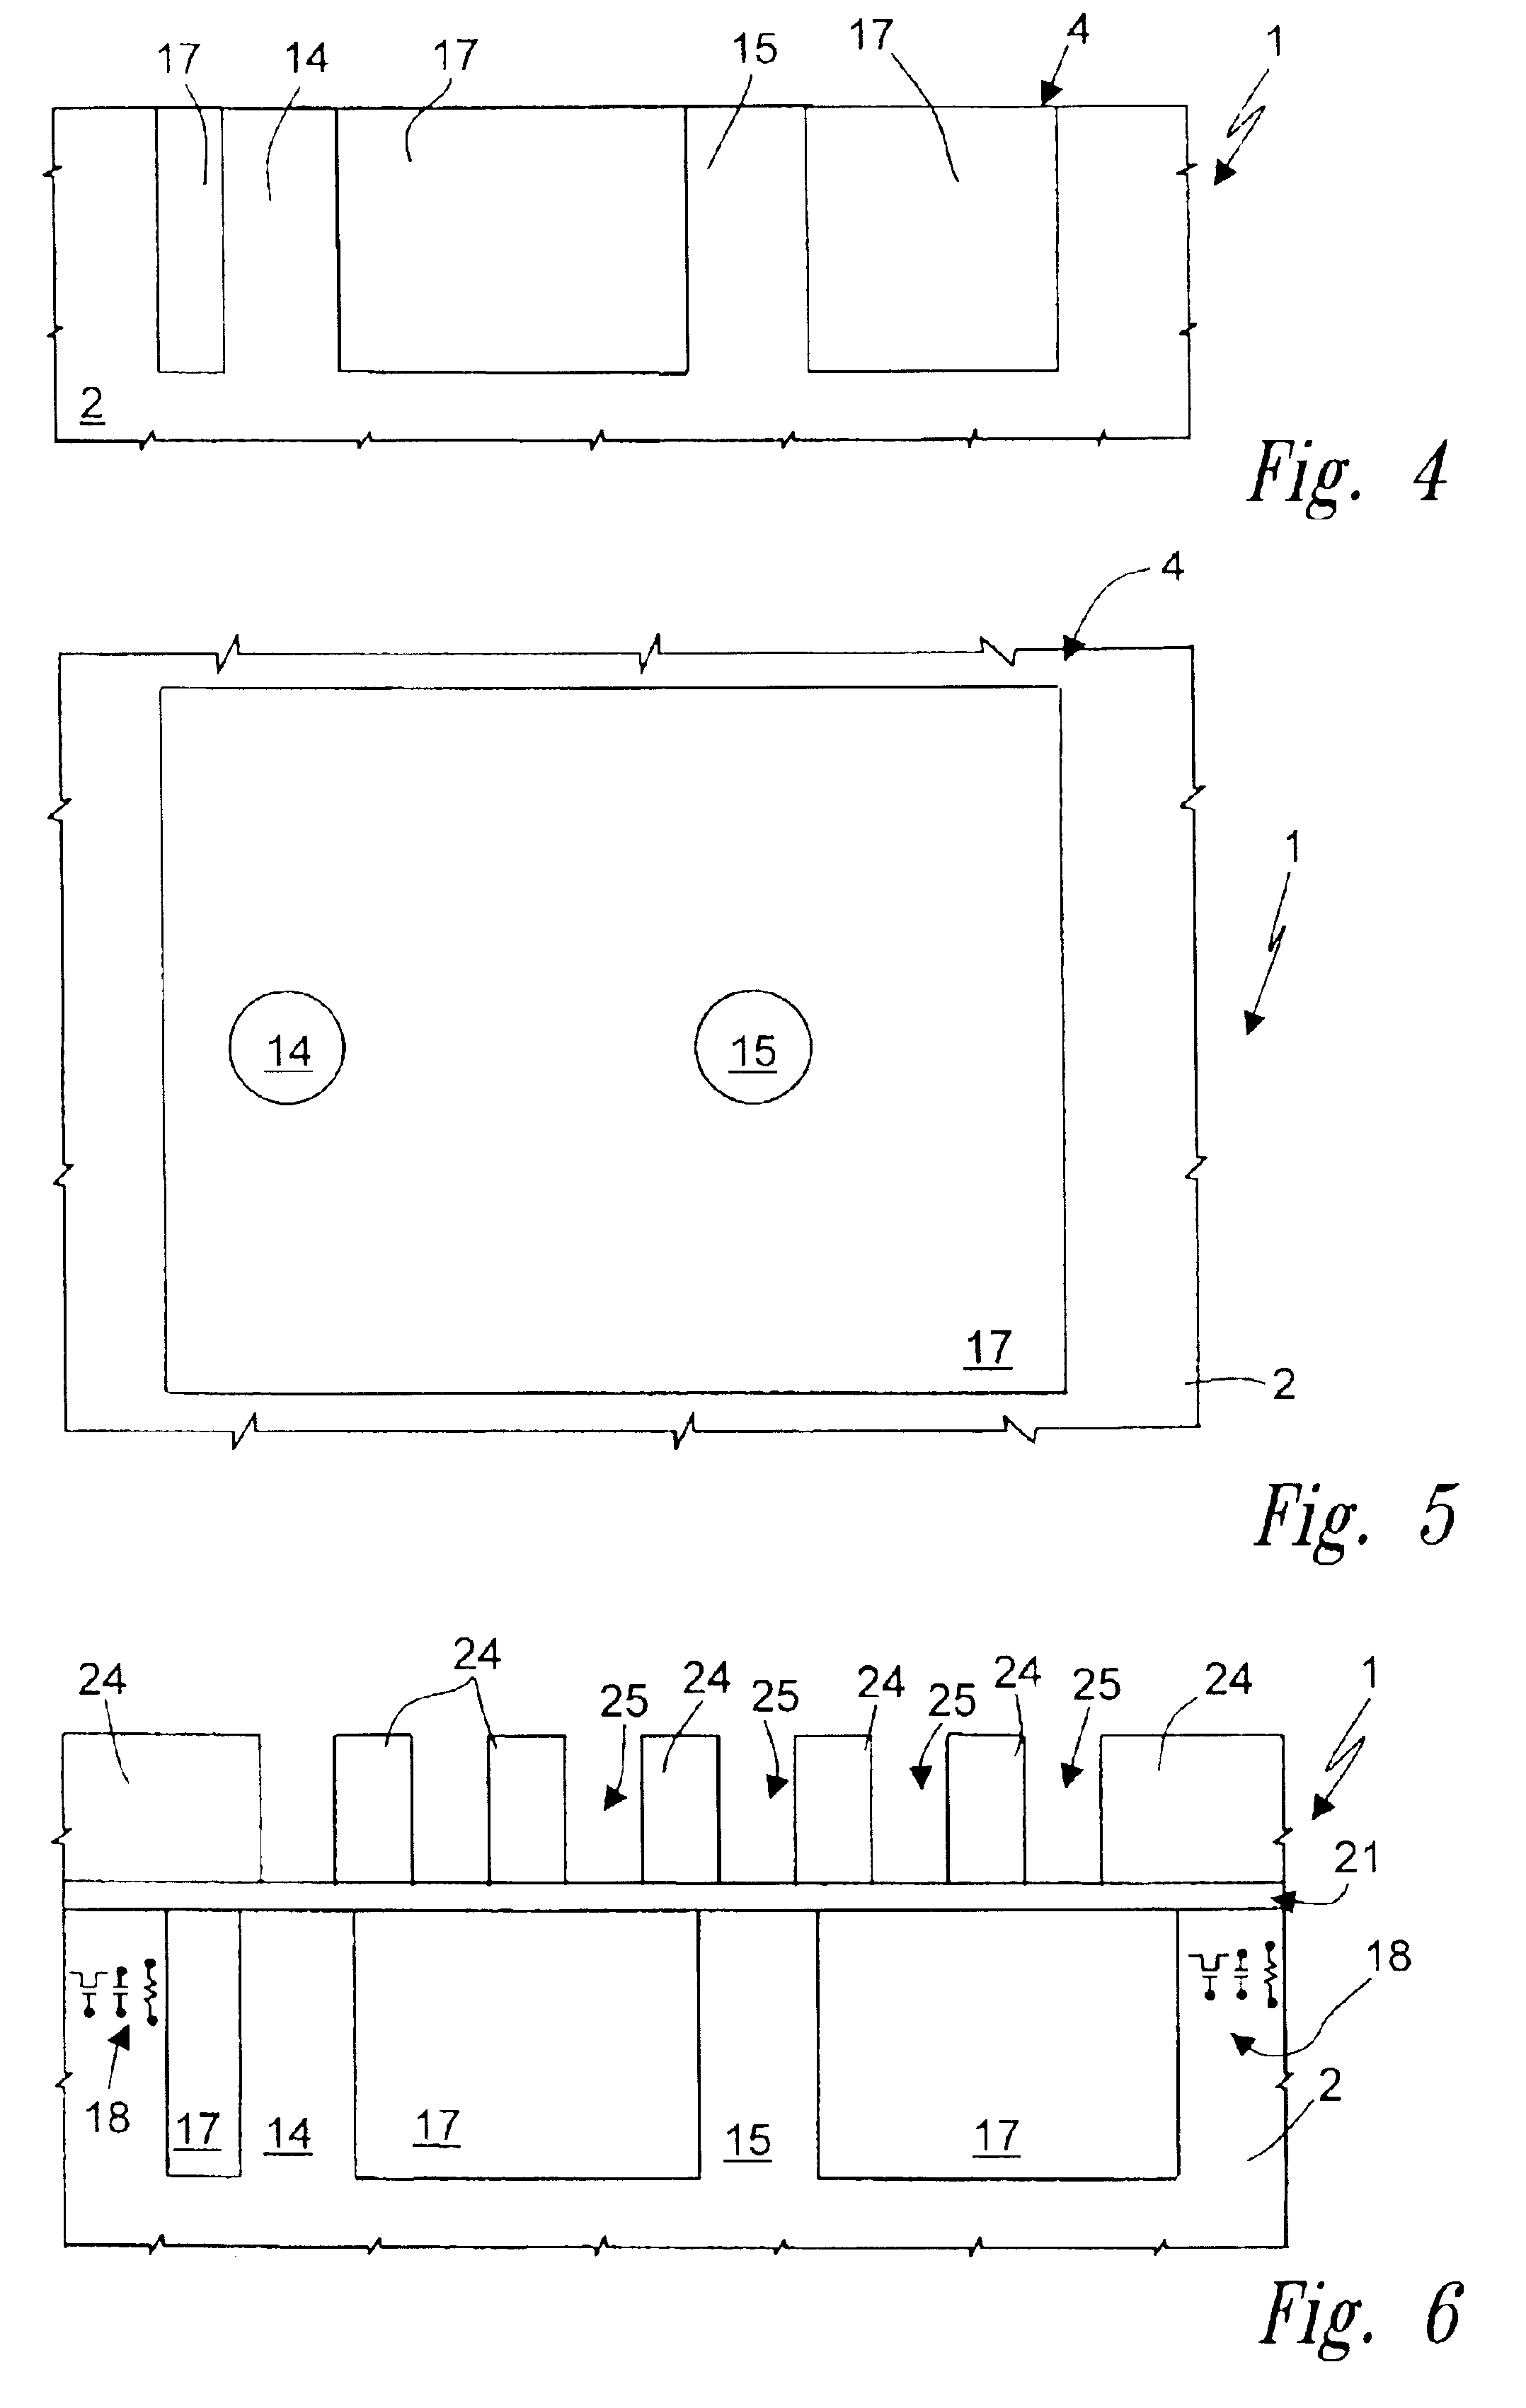 Process for manufacturing a semiconductor wafer integrating electronic devices and a structure for electromagnetic decoupling